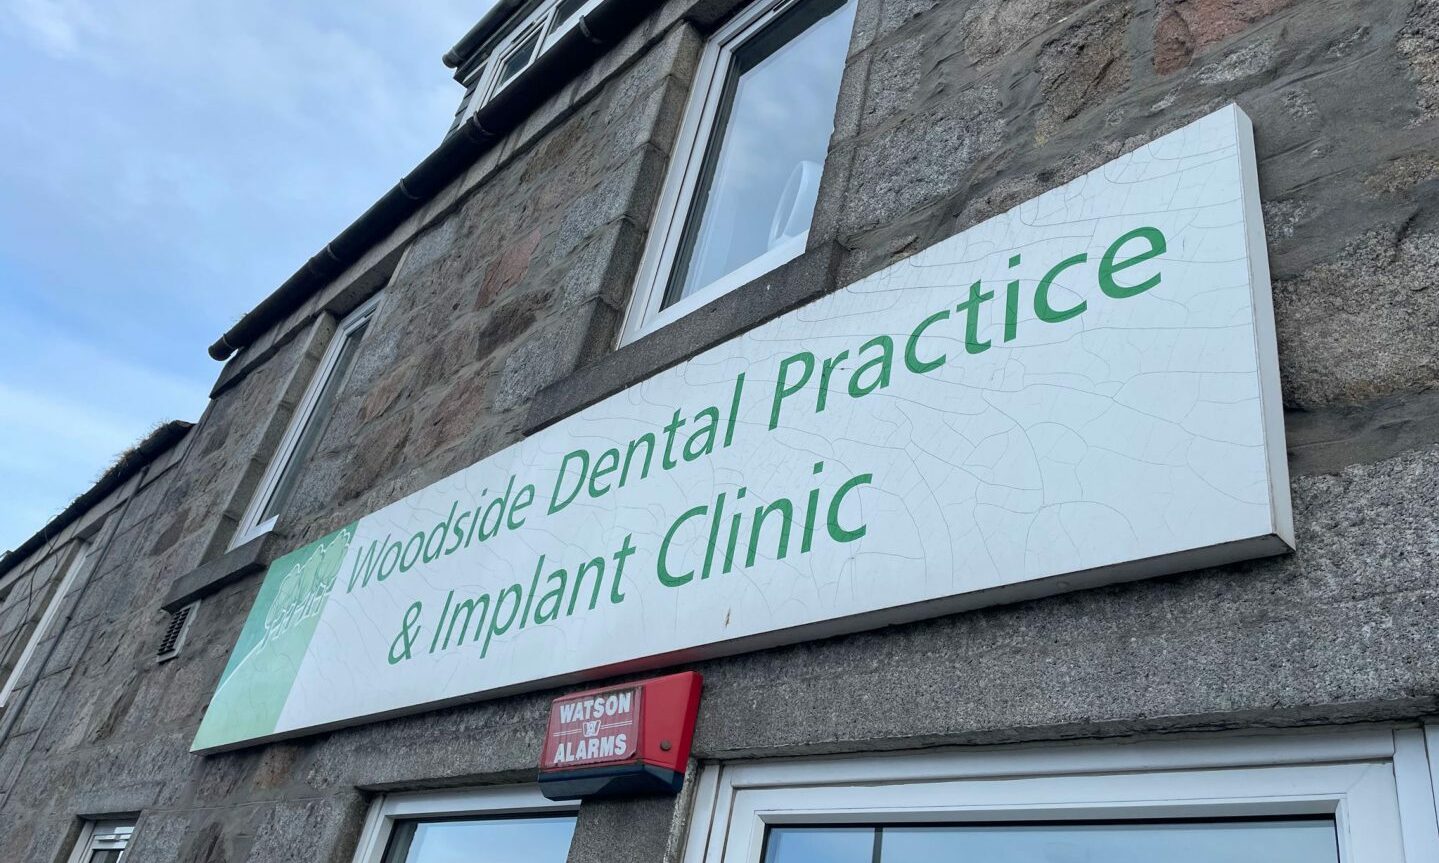 The green and white sign above the Woodside dental practice & implant clinic